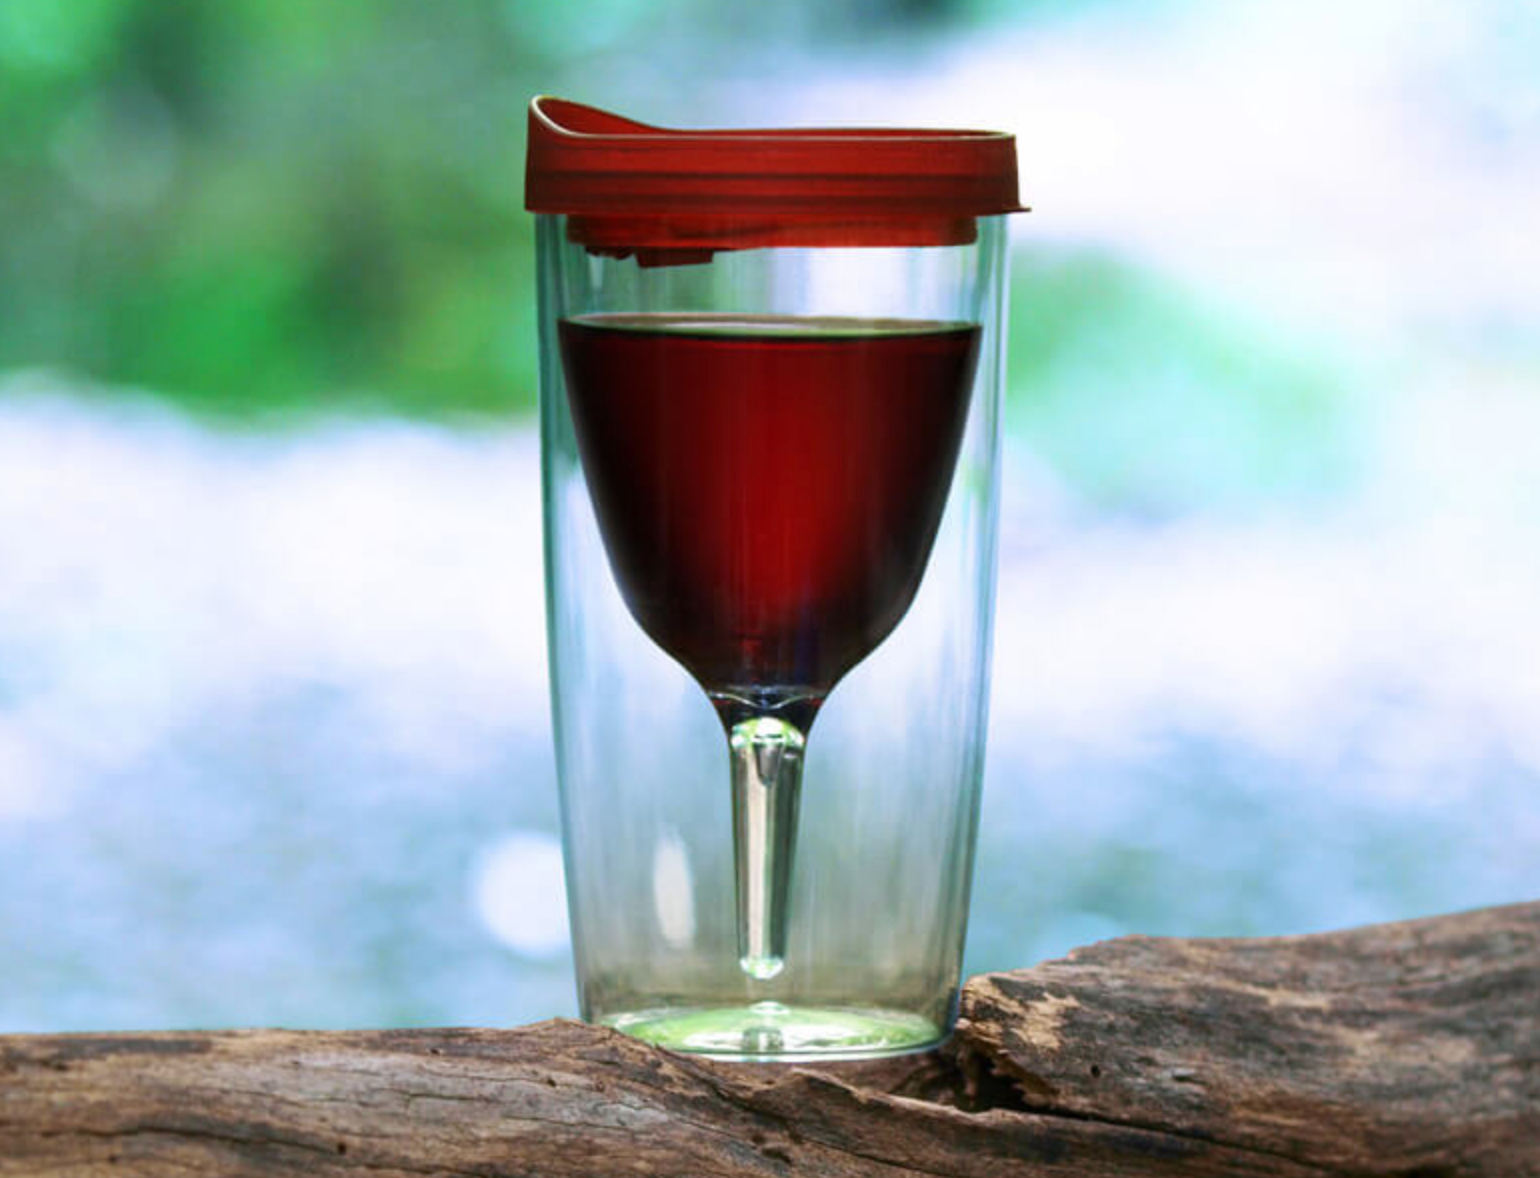 Portable sip cup wine glasses are now a thing you can buy, The Manc